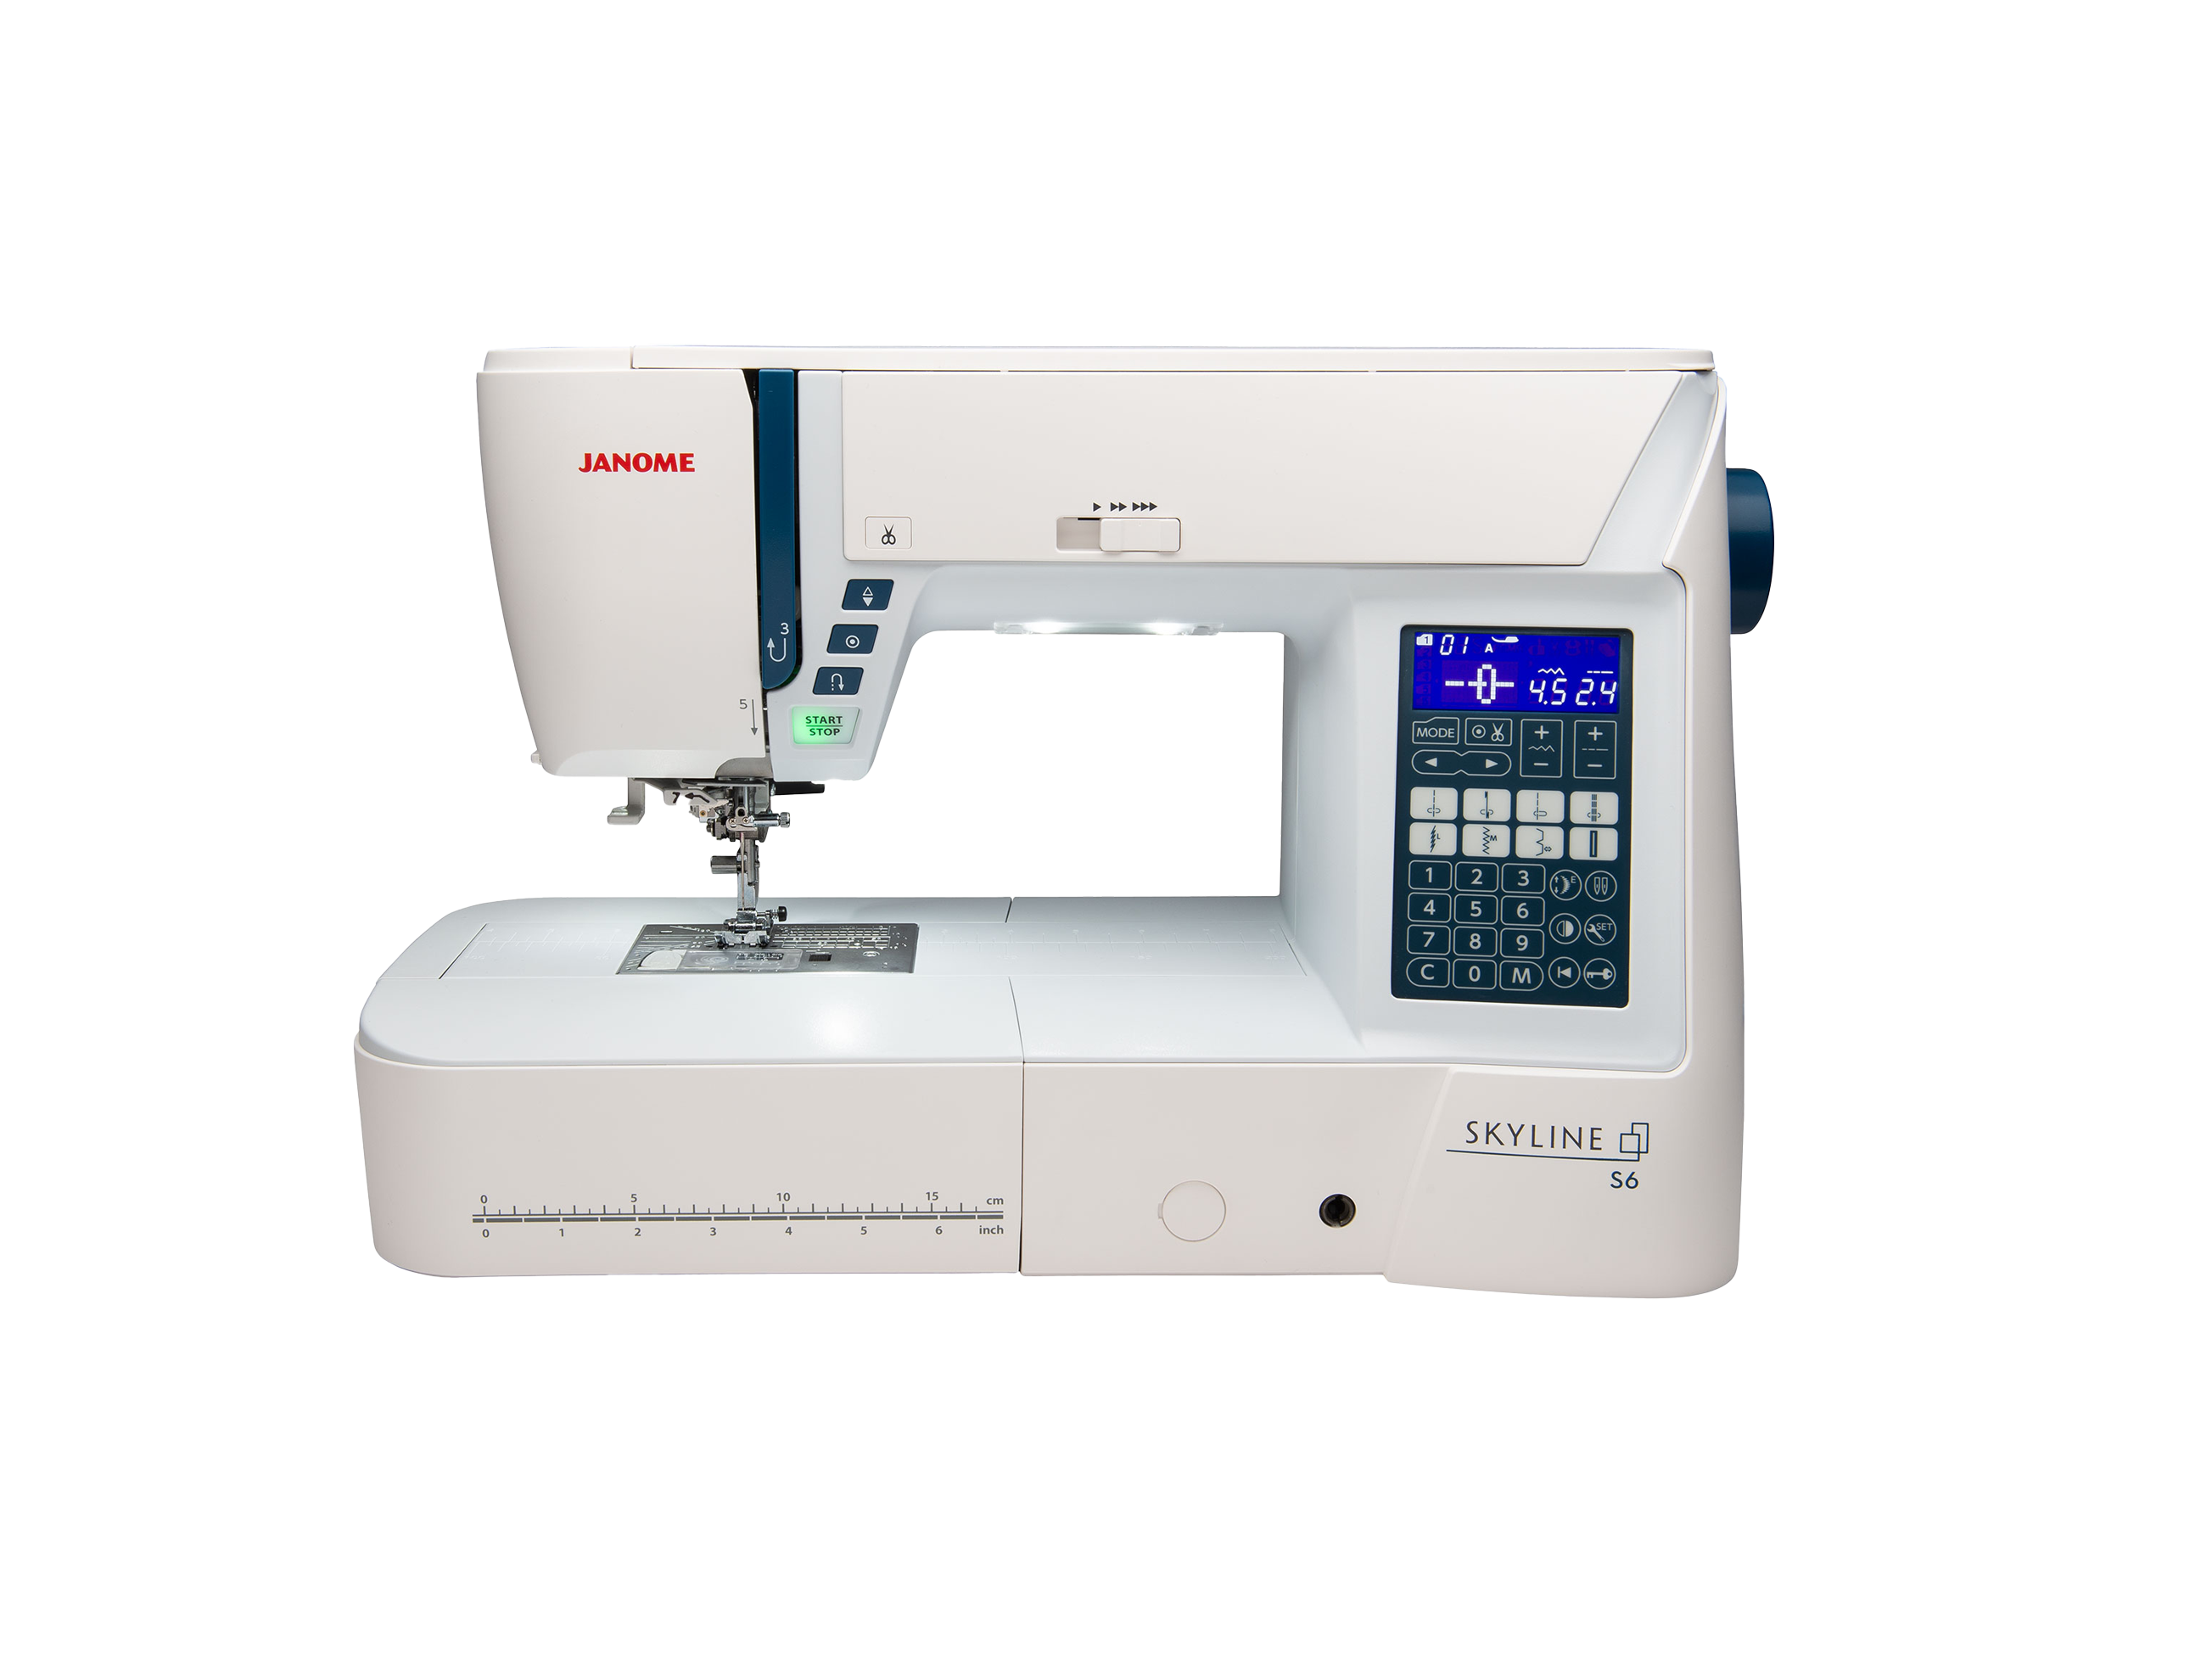 Janome Skyline S6 Sewing and Quilting Machine